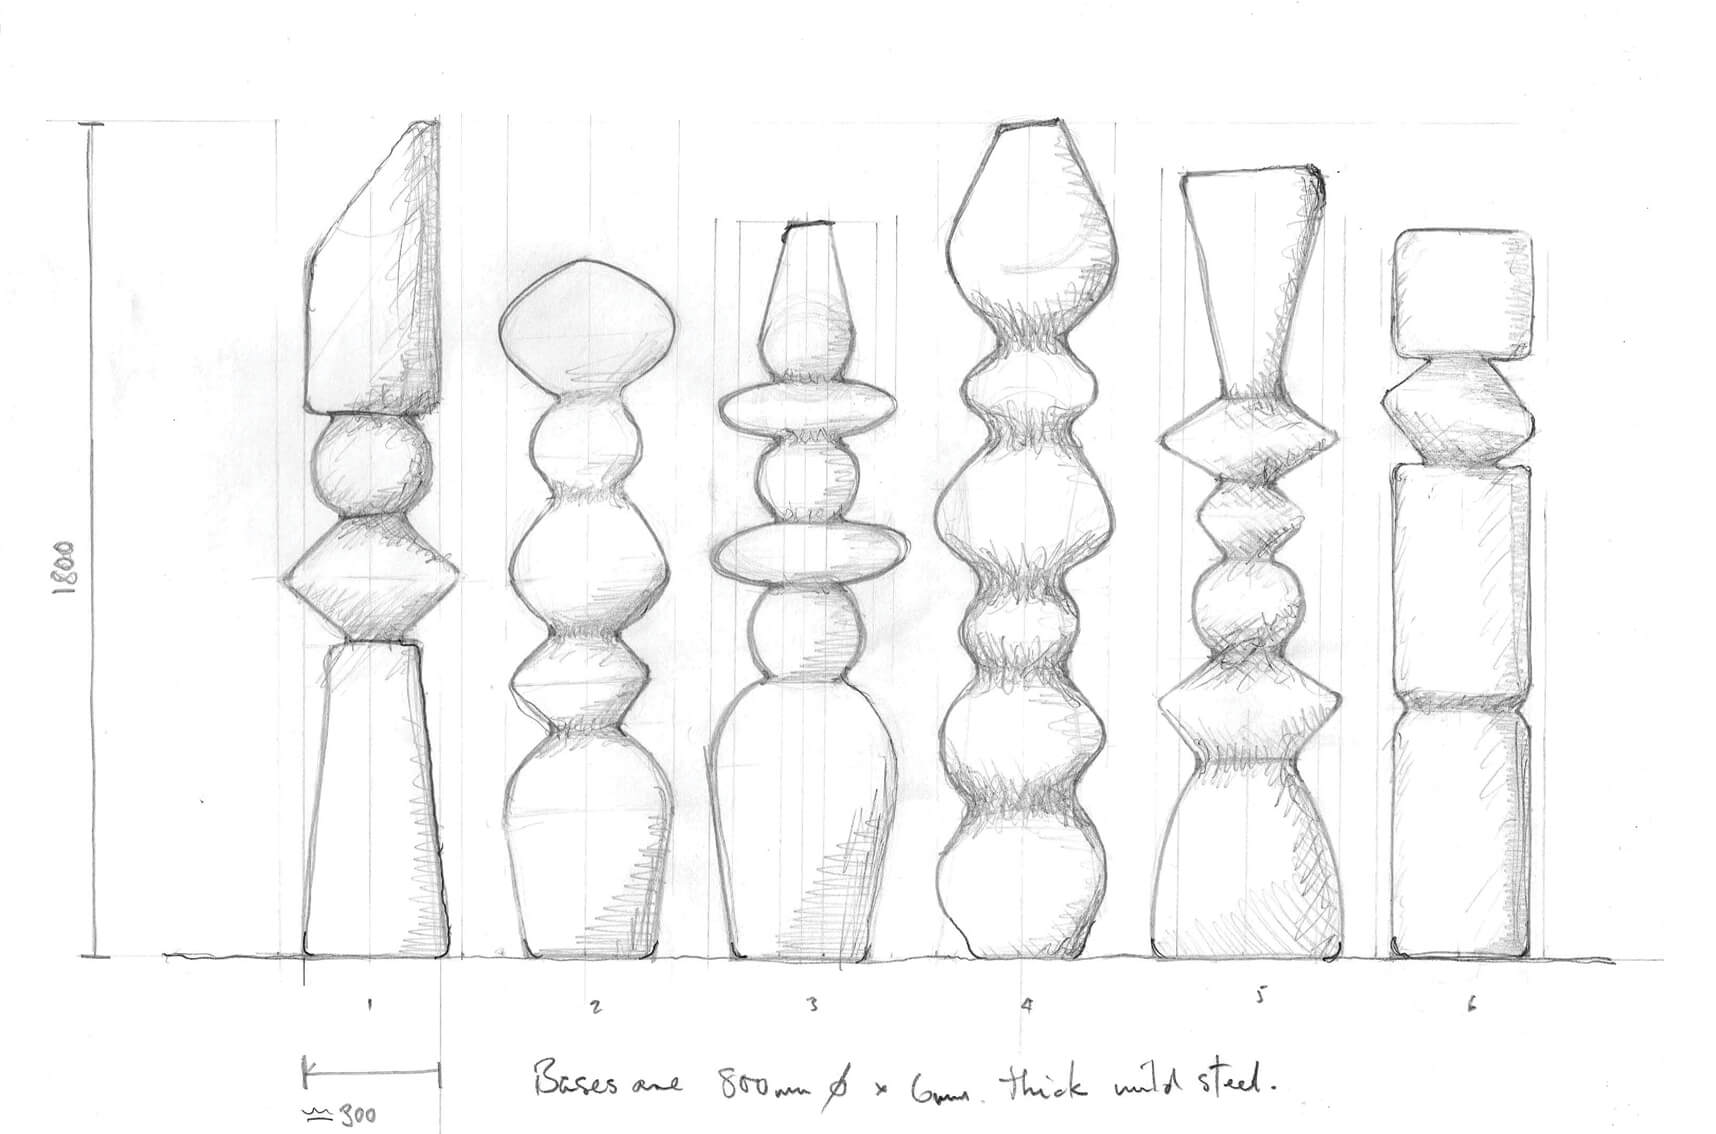 Commissioned sculpture, sketch 2